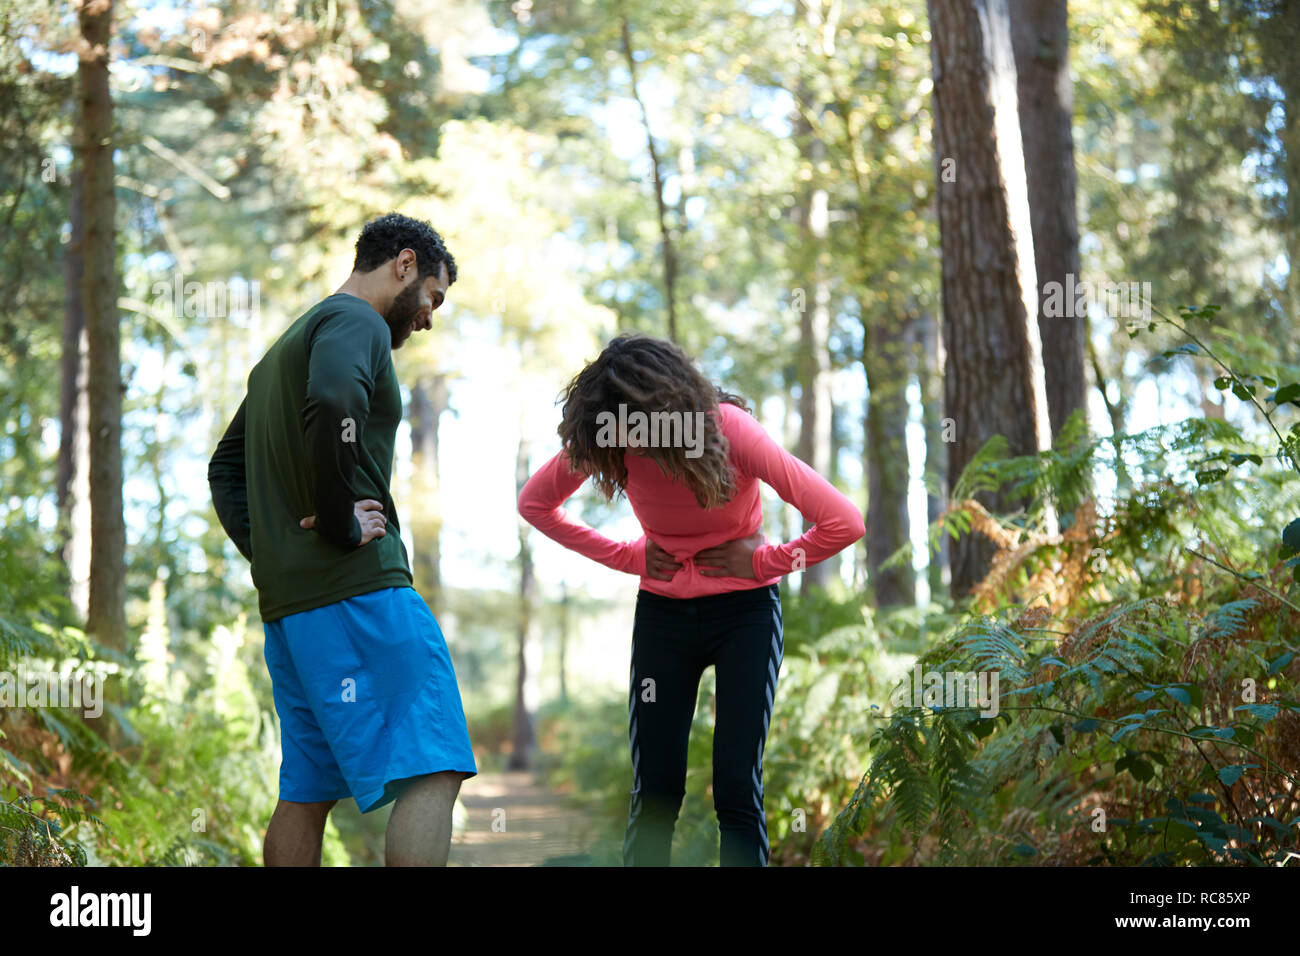 Exhausted male and female runners taking a break in forest Stock Photo